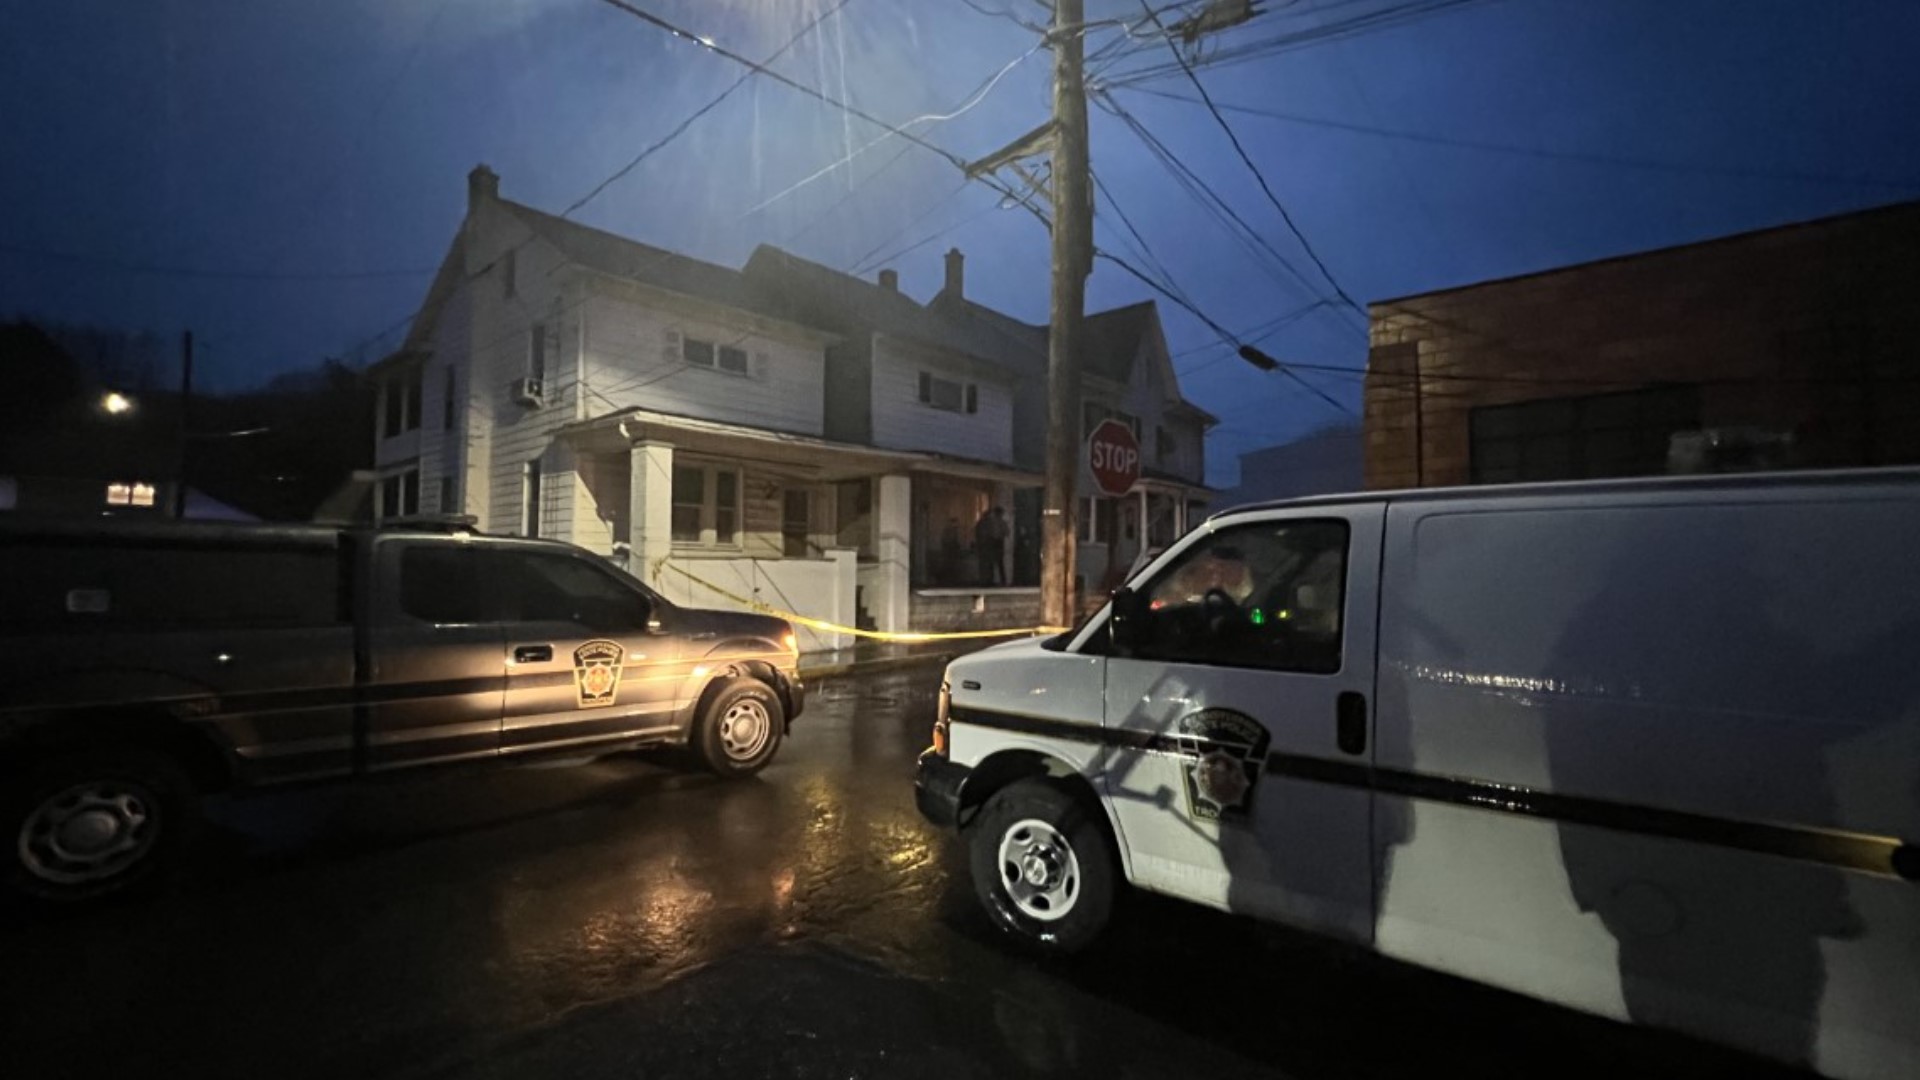 Police in Shamokin are investigating a shocking homicide in which a woman is believed to have been killed days ago with a sword.